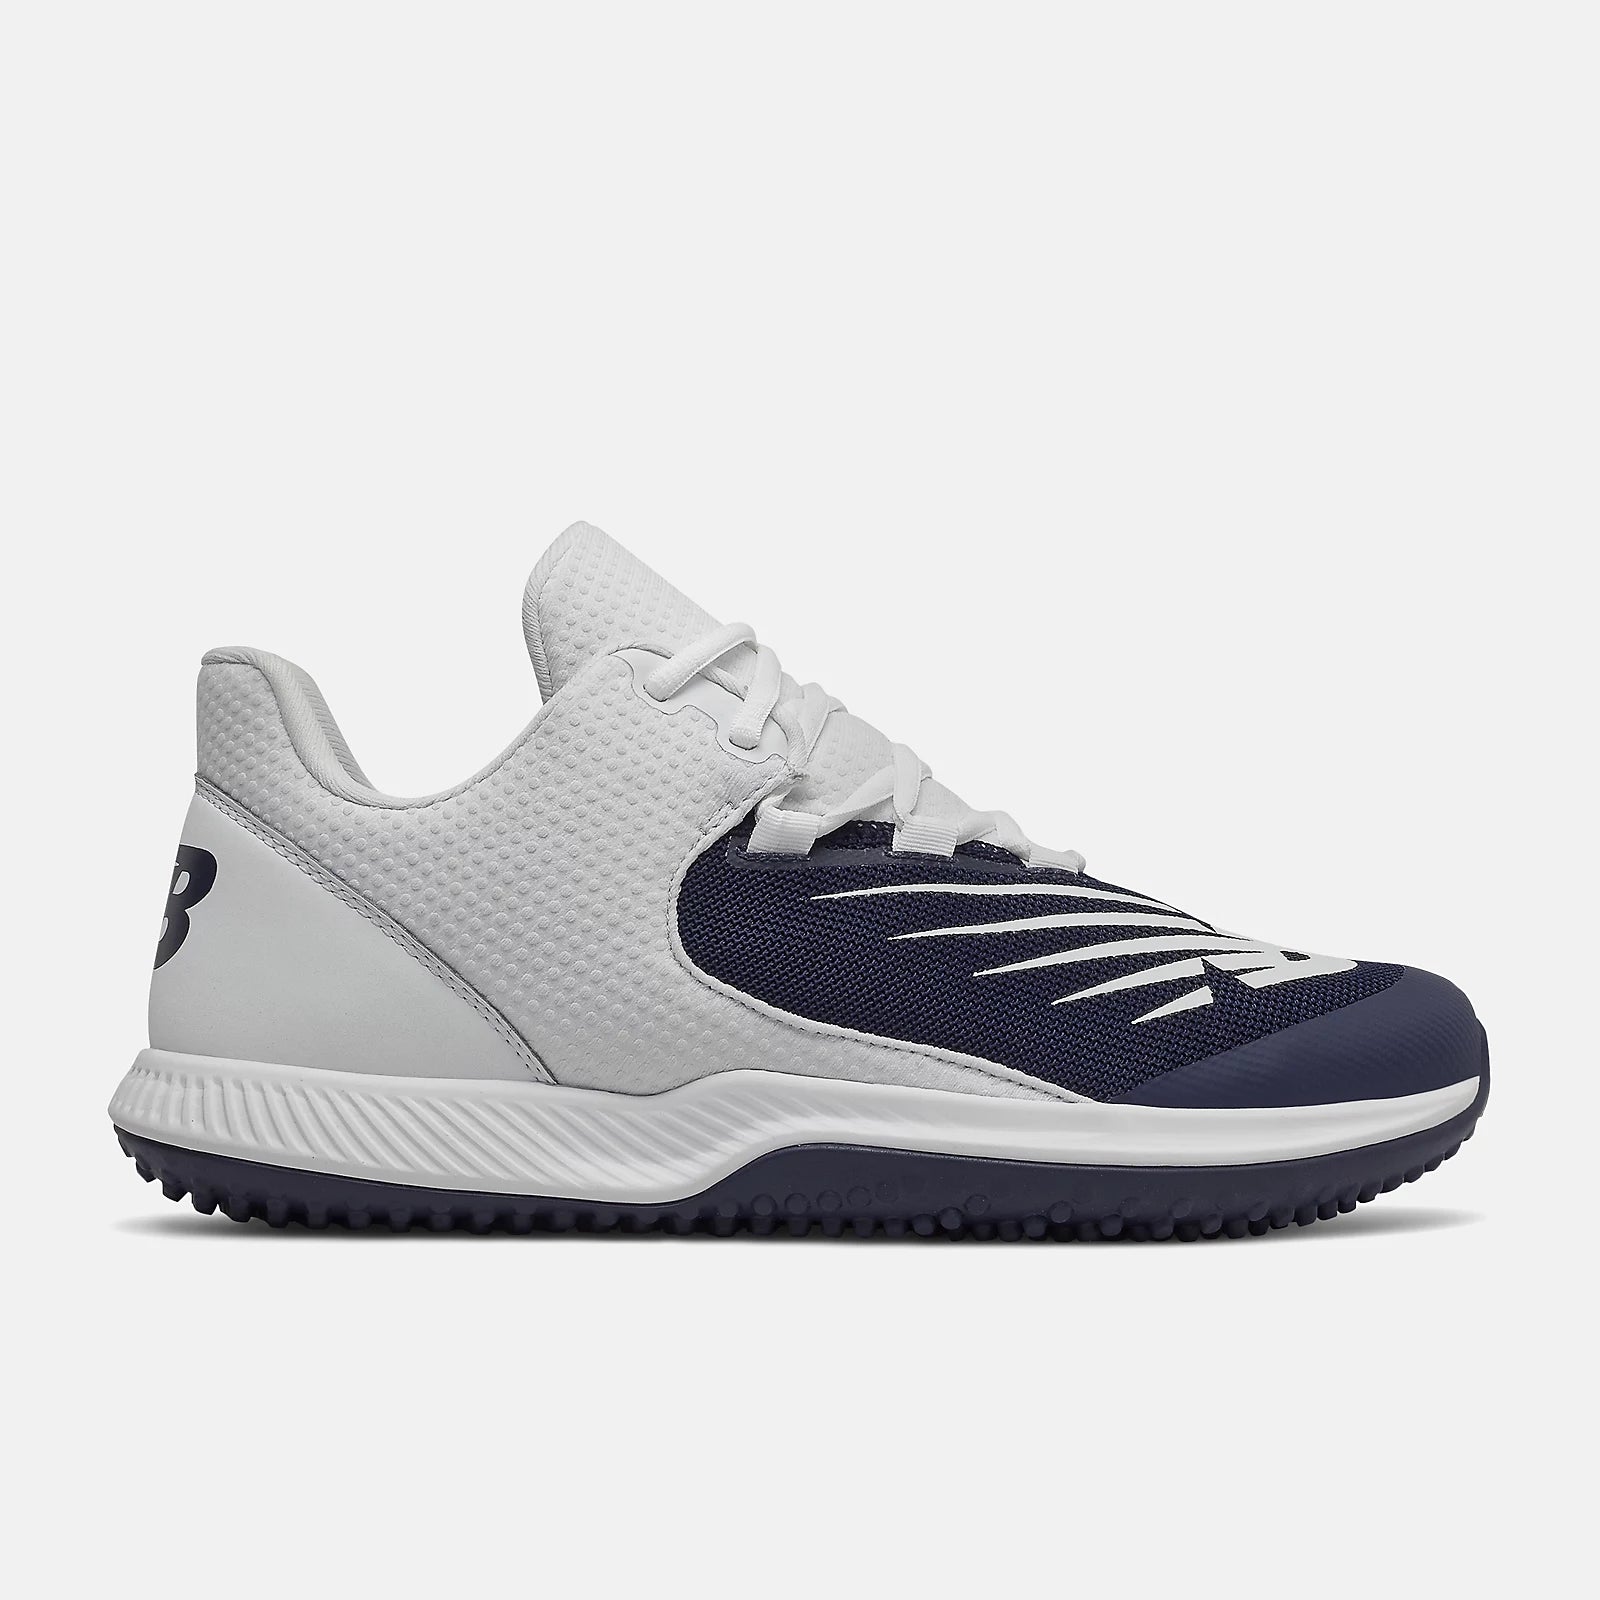 New Balance Turf Shoe - Navy/White FuelCell 4040v6 (T4040TN6)